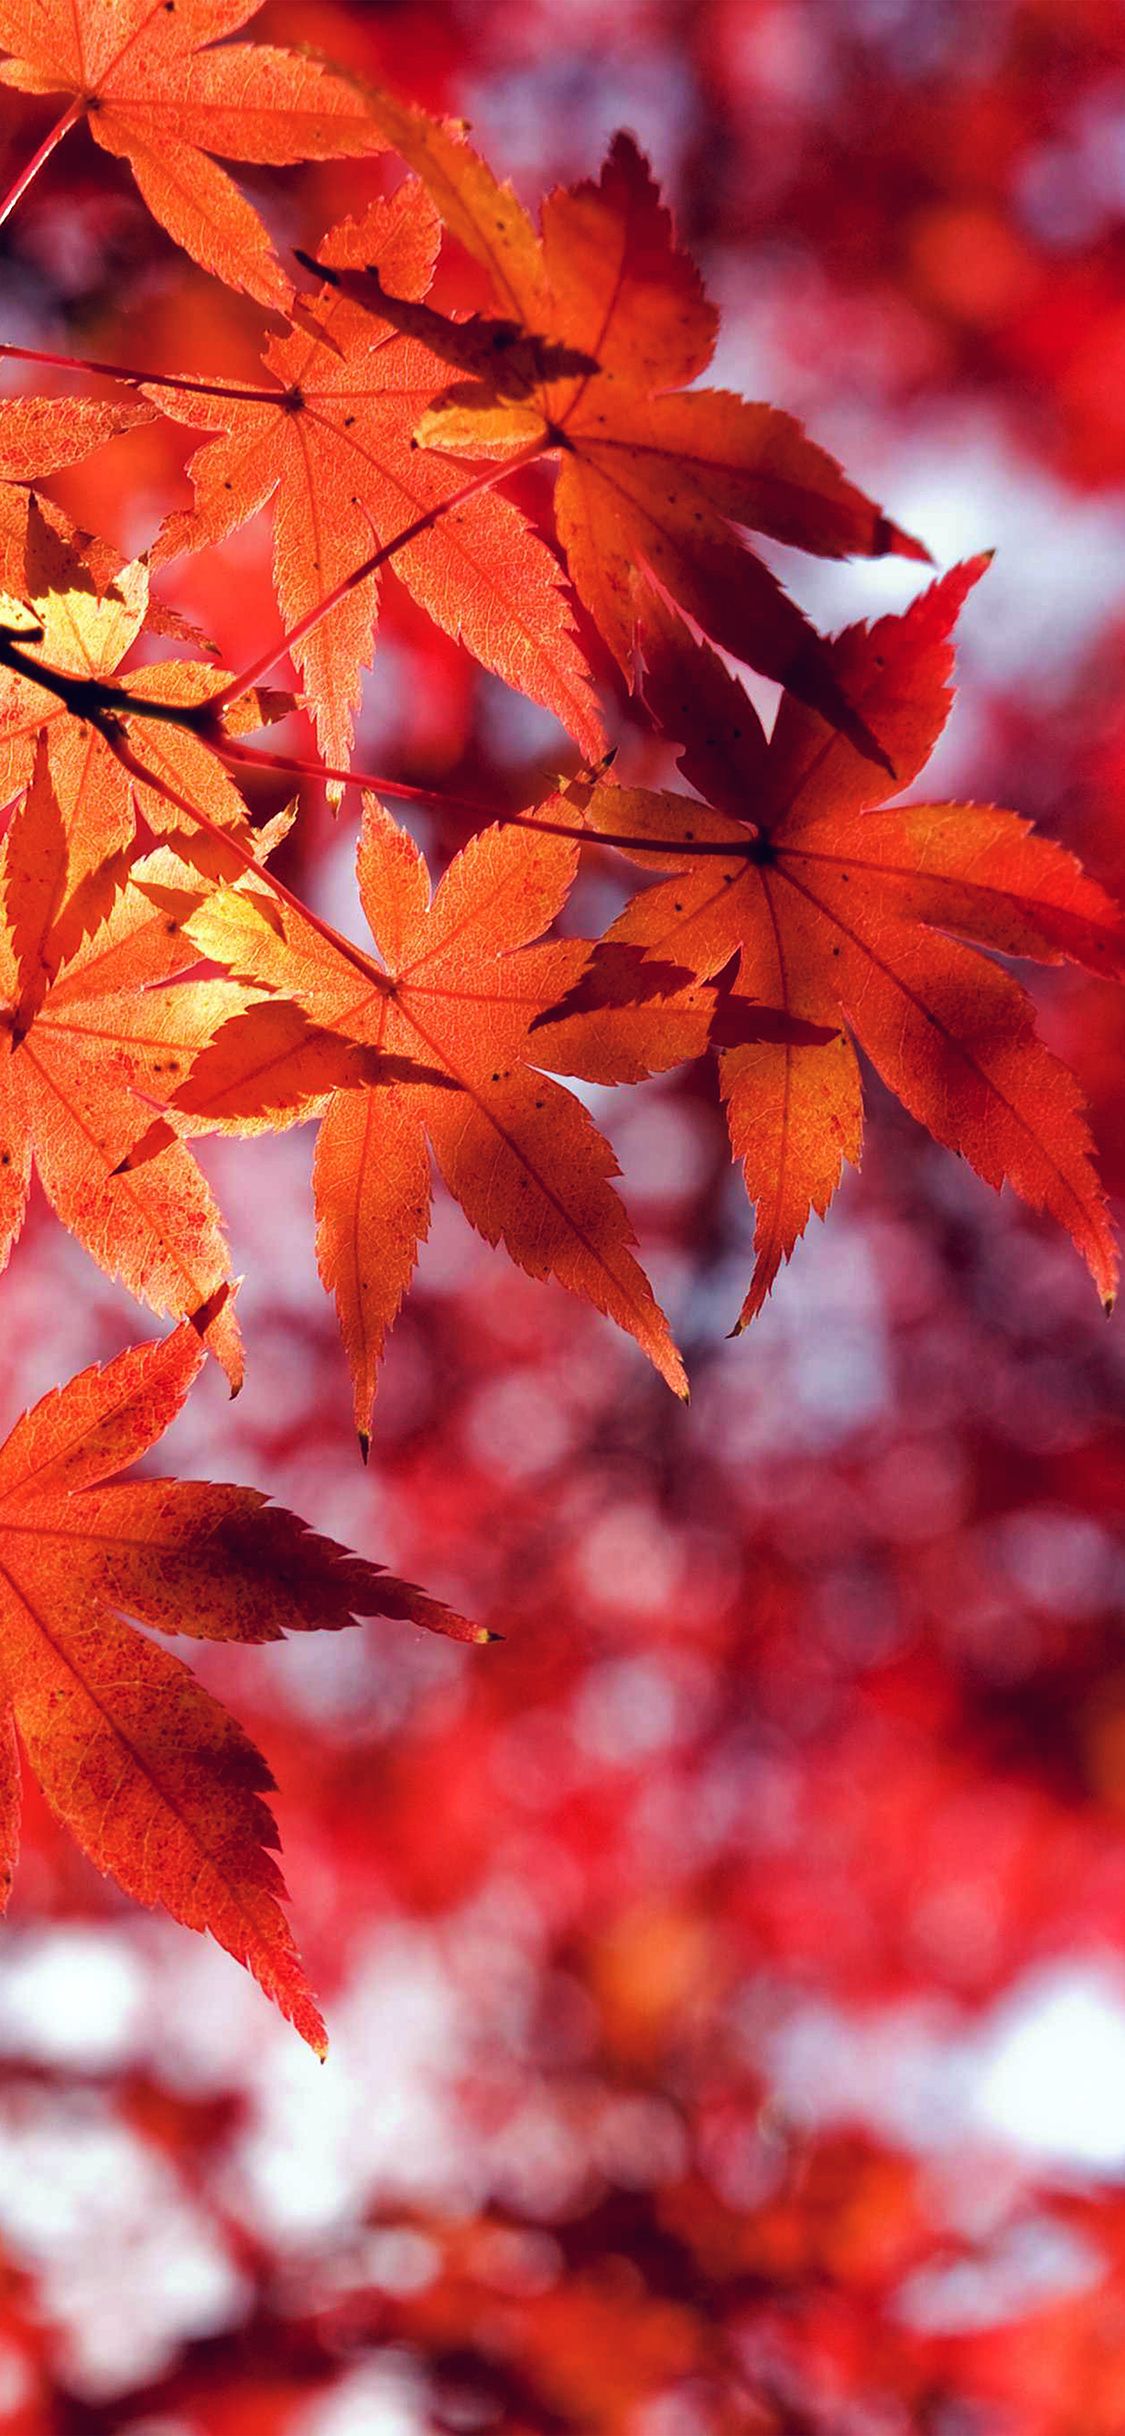 Iphone X Autumn Image Wallpapers